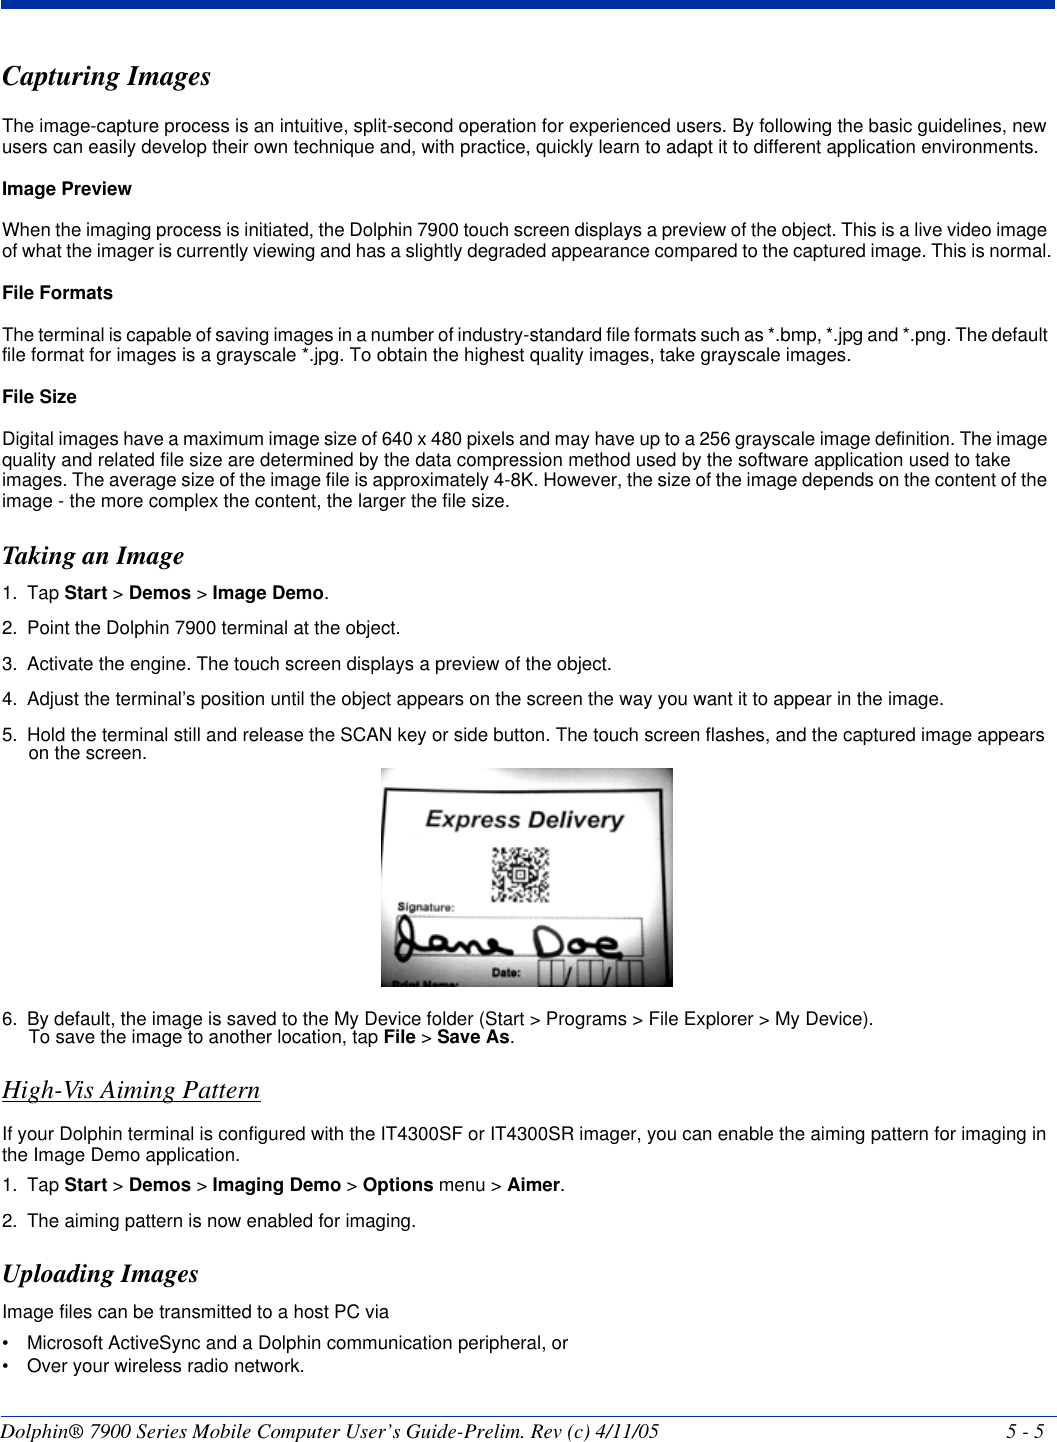 Dolphin® 7900 Series Mobile Computer User’s Guide-Prelim. Rev (c) 4/11/05 5 - 5Capturing ImagesThe image-capture process is an intuitive, split-second operation for experienced users. By following the basic guidelines, new users can easily develop their own technique and, with practice, quickly learn to adapt it to different application environments. Image PreviewWhen the imaging process is initiated, the Dolphin 7900 touch screen displays a preview of the object. This is a live video image of what the imager is currently viewing and has a slightly degraded appearance compared to the captured image. This is normal.File FormatsThe terminal is capable of saving images in a number of industry-standard file formats such as *.bmp, *.jpg and *.png. The default file format for images is a grayscale *.jpg. To obtain the highest quality images, take grayscale images.File SizeDigital images have a maximum image size of 640 x 480 pixels and may have up to a 256 grayscale image definition. The image quality and related file size are determined by the data compression method used by the software application used to take images. The average size of the image file is approximately 4-8K. However, the size of the image depends on the content of the image - the more complex the content, the larger the file size. Taking an Image1. Tap Start &gt; Demos &gt; Image Demo.2. Point the Dolphin 7900 terminal at the object.3. Activate the engine. The touch screen displays a preview of the object.4. Adjust the terminal’s position until the object appears on the screen the way you want it to appear in the image.5. Hold the terminal still and release the SCAN key or side button. The touch screen flashes, and the captured image appears on the screen. 6. By default, the image is saved to the My Device folder (Start &gt; Programs &gt; File Explorer &gt; My Device). To save the image to another location, tap File &gt; Save As.High-Vis Aiming PatternIf your Dolphin terminal is configured with the IT4300SF or IT4300SR imager, you can enable the aiming pattern for imaging in the Image Demo application.1. Tap Start &gt; Demos &gt; Imaging Demo &gt; Options menu &gt; Aimer.2. The aiming pattern is now enabled for imaging.Uploading ImagesImage files can be transmitted to a host PC via • Microsoft ActiveSync and a Dolphin communication peripheral, or • Over your wireless radio network.